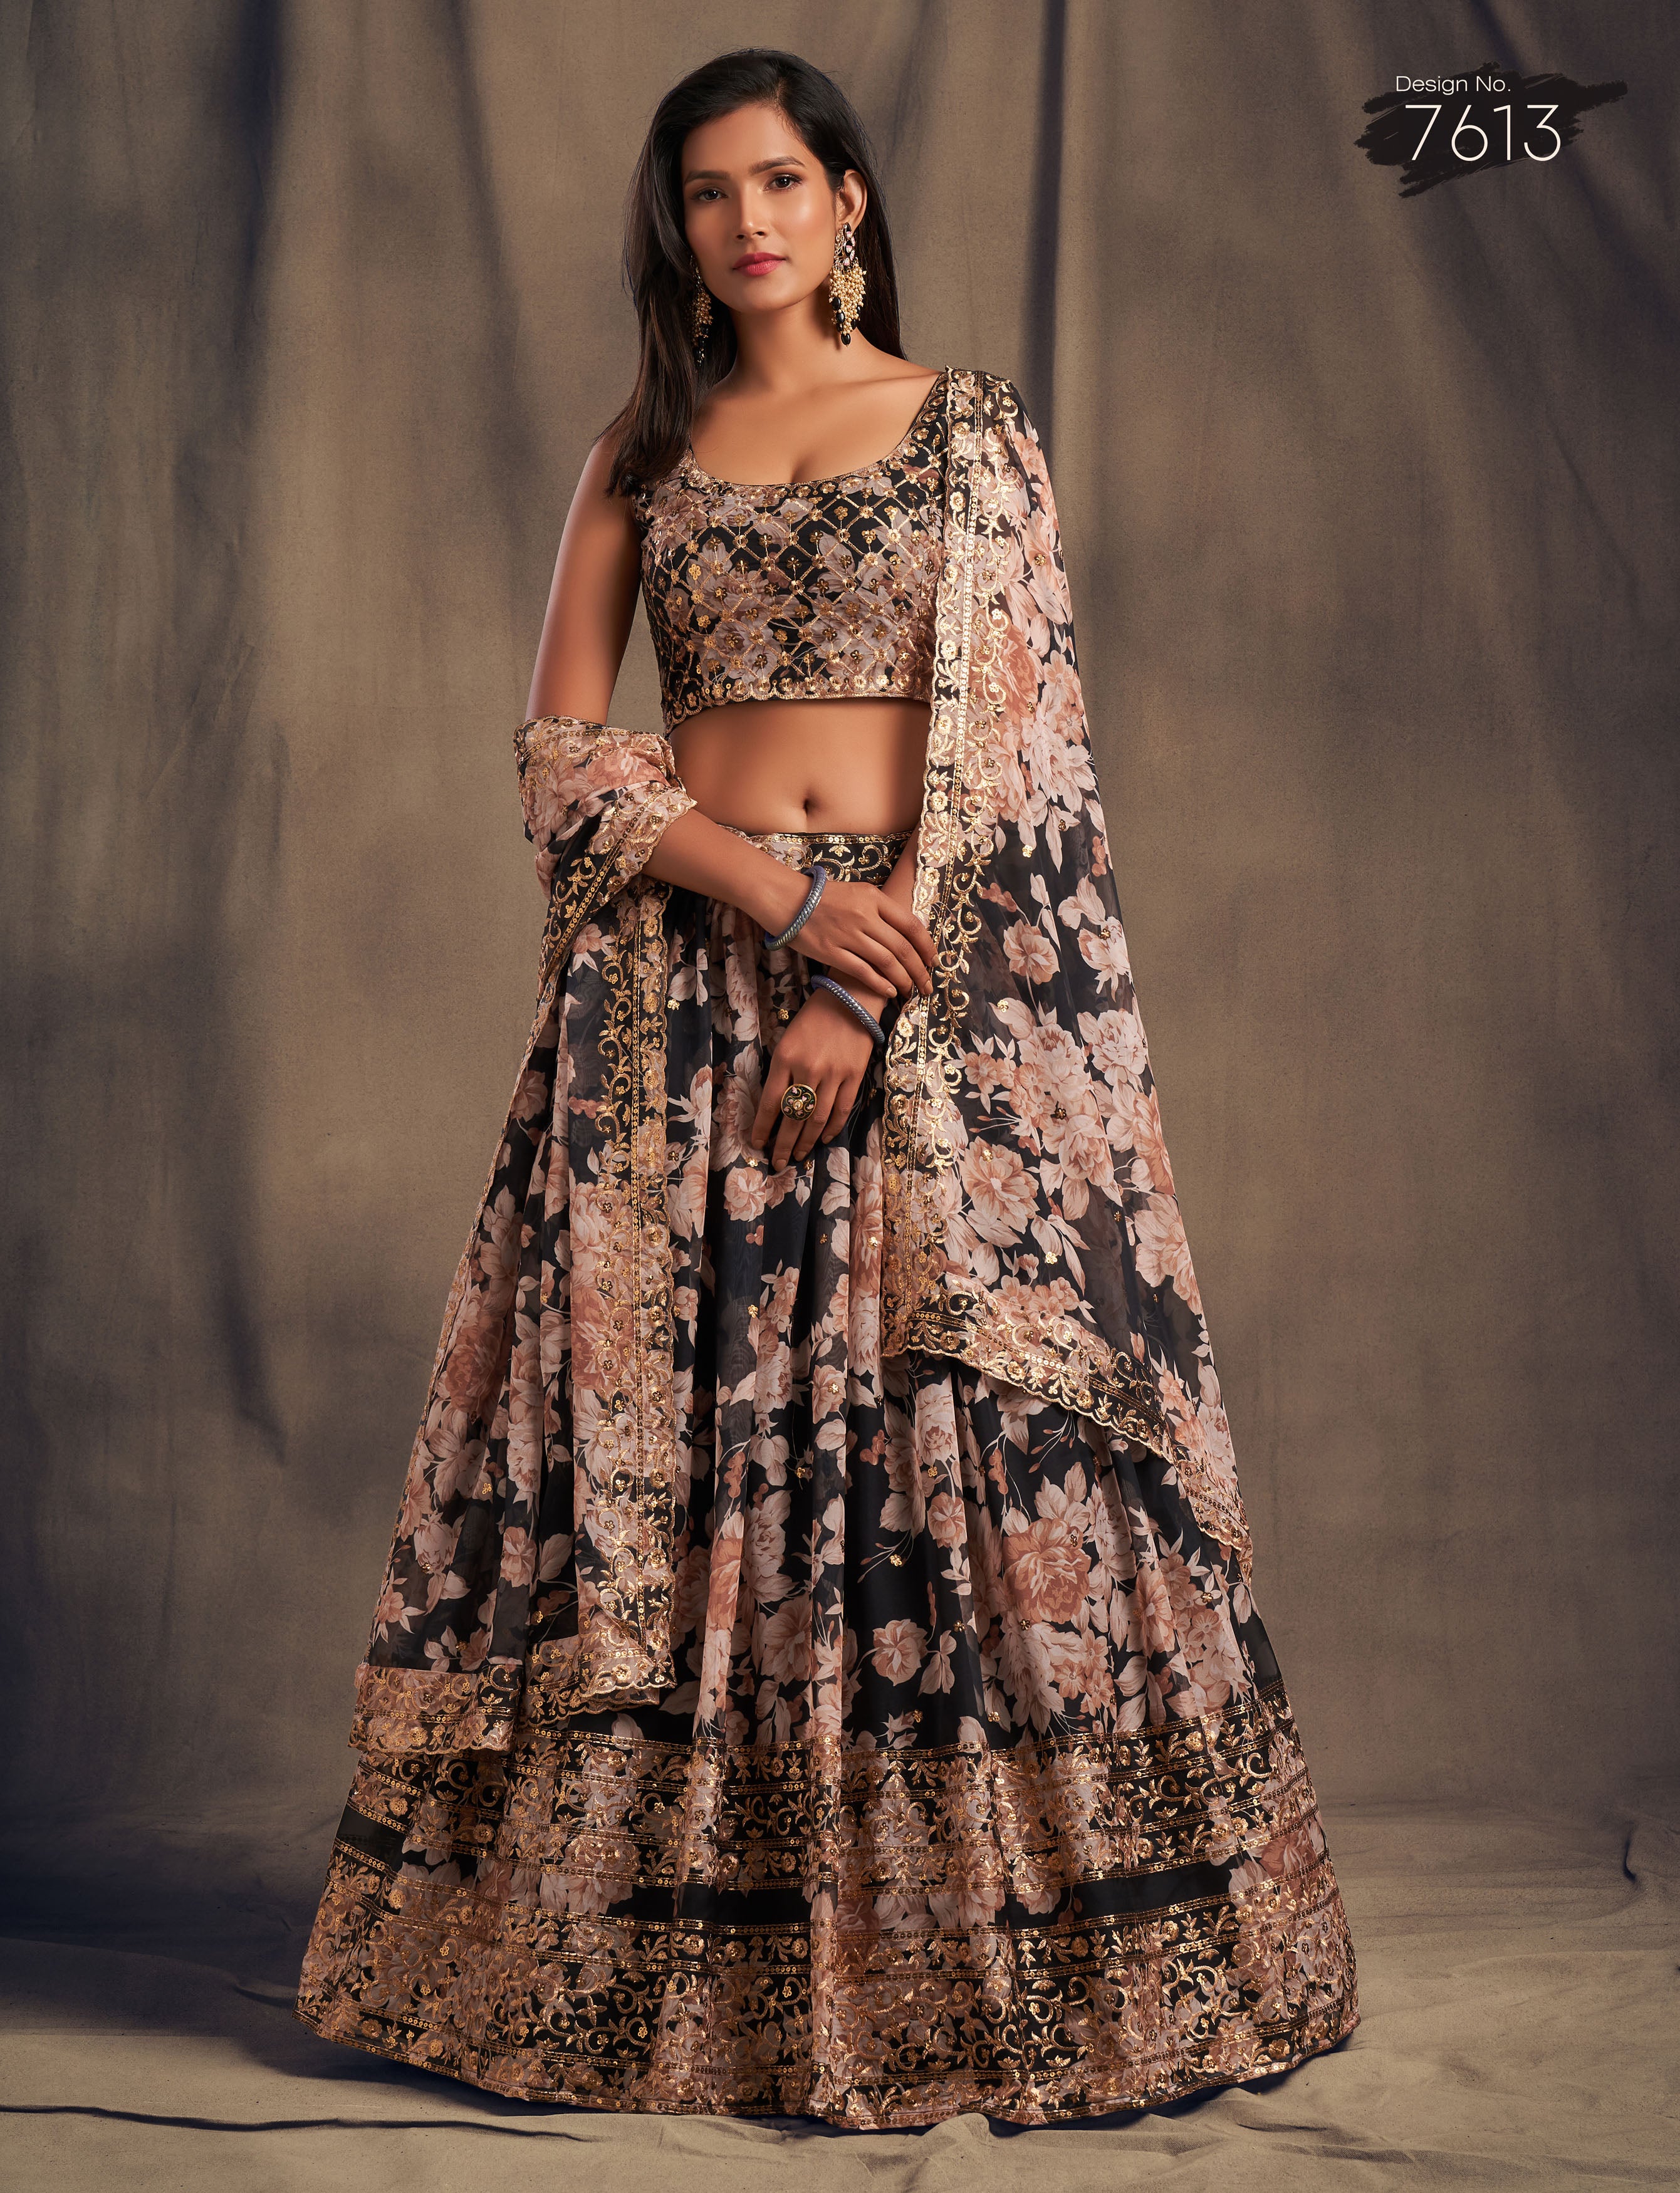 shimmer skirt | Indian fashion, Indian dresses, Indian attire